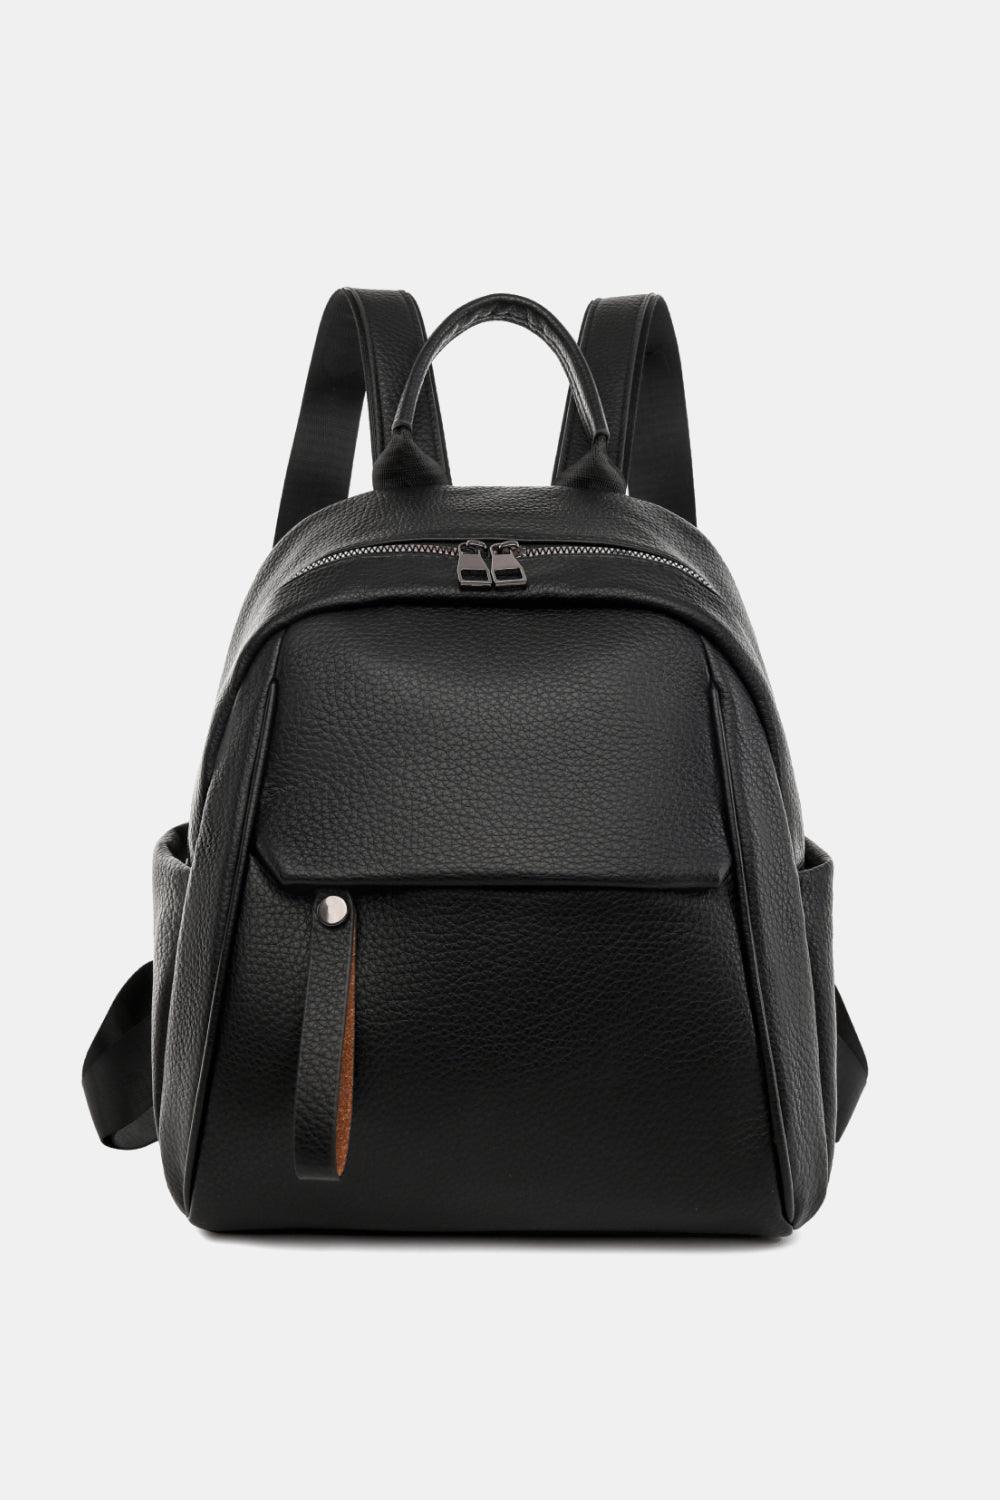 Medium PU Leather Backpack - Crazy Like a Daisy Boutique